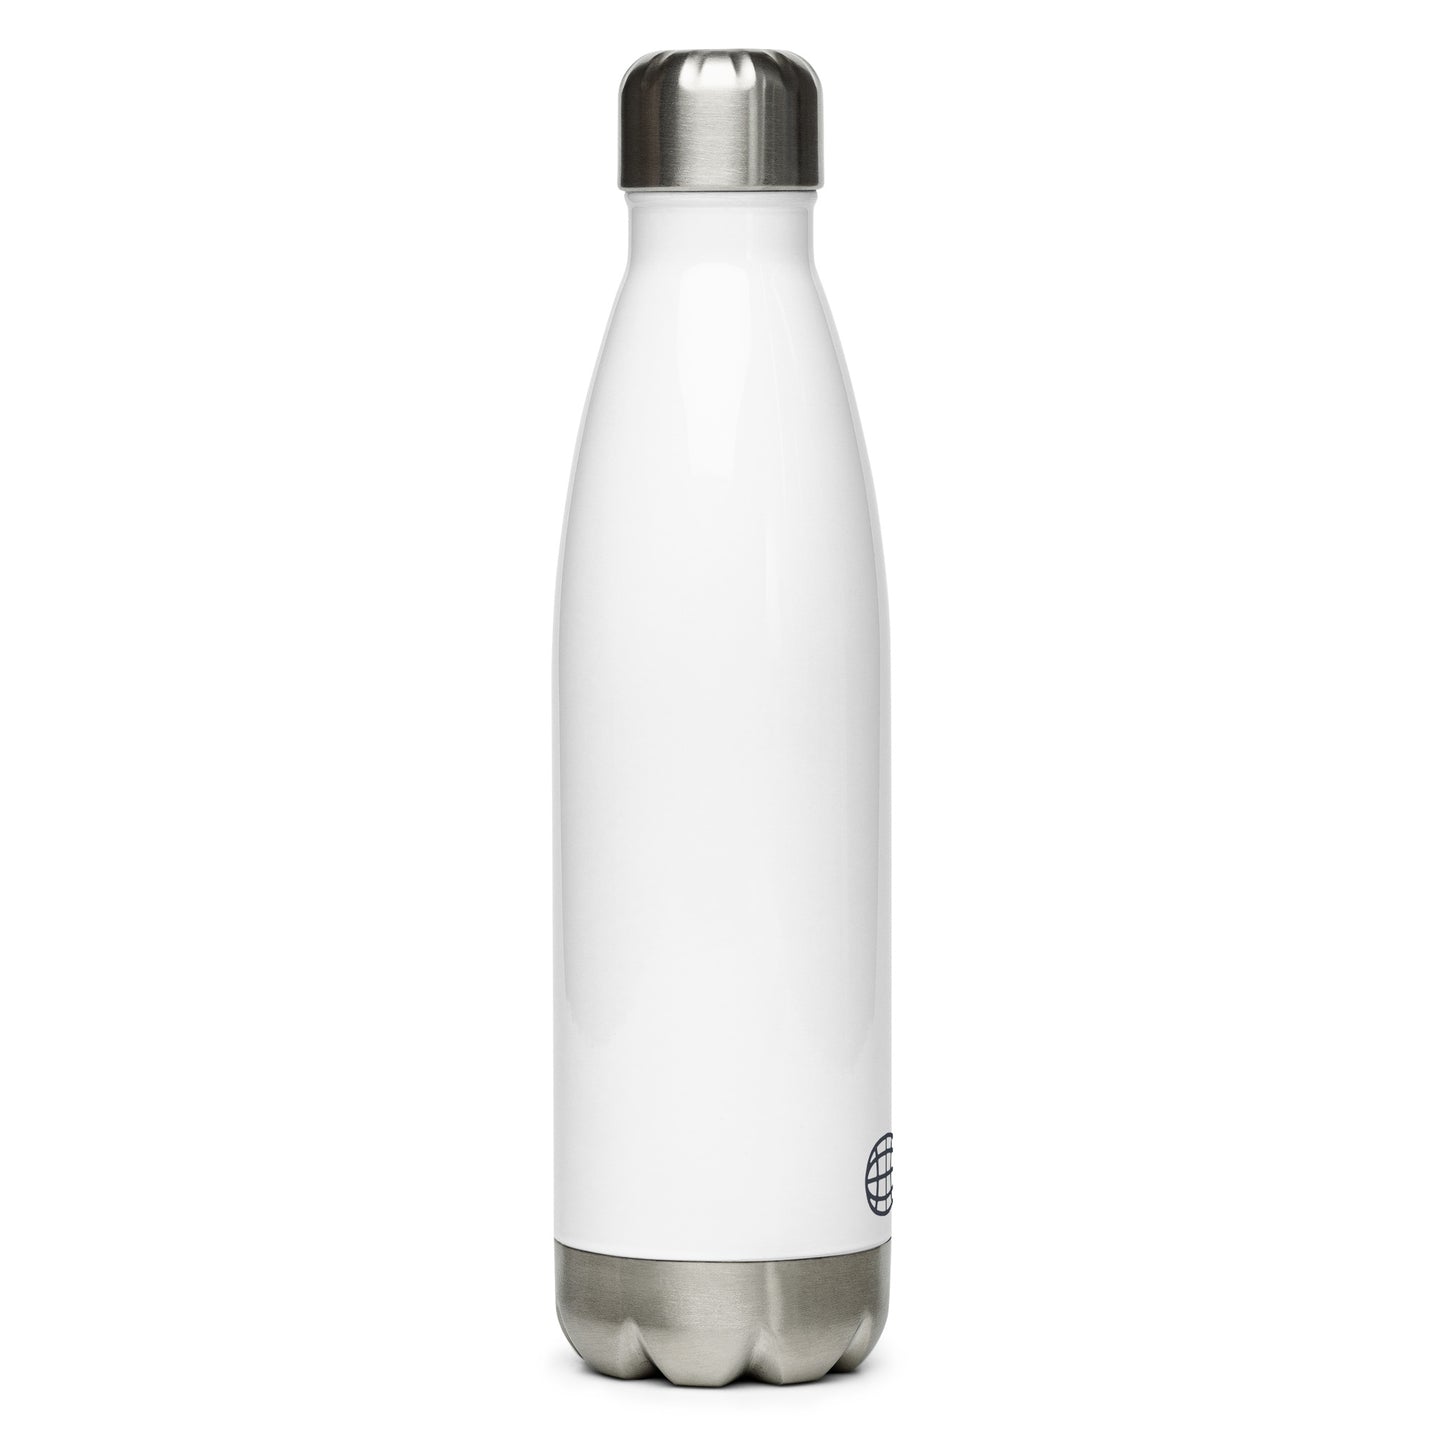 ITHF Stainless Steel Water Bottle